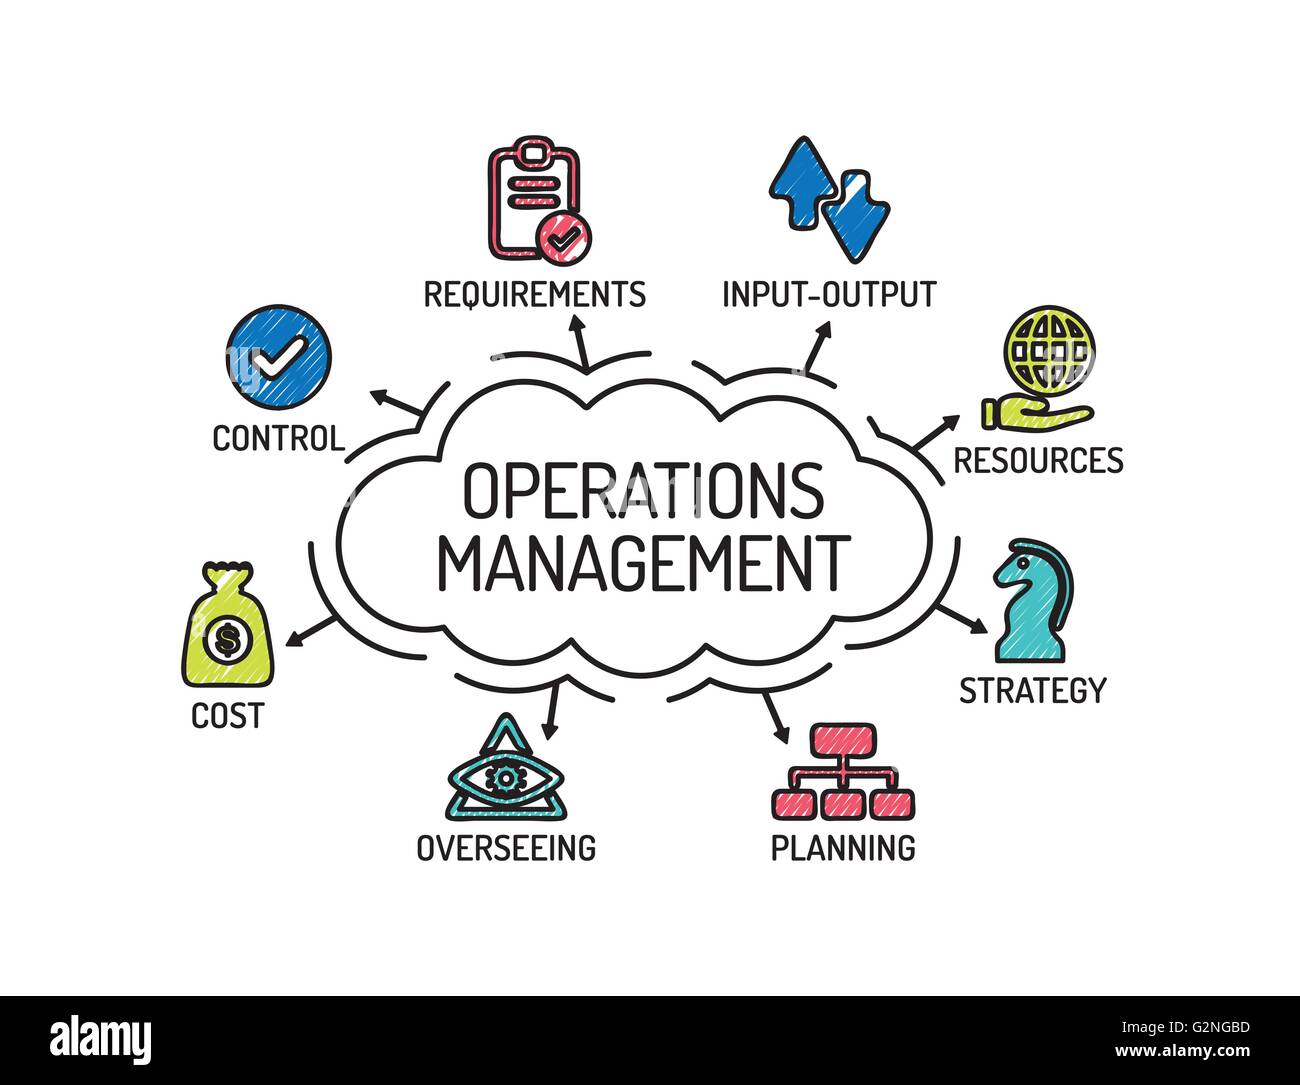 Operations Management. Chart with keywords and icons. Sketch Stock Vector